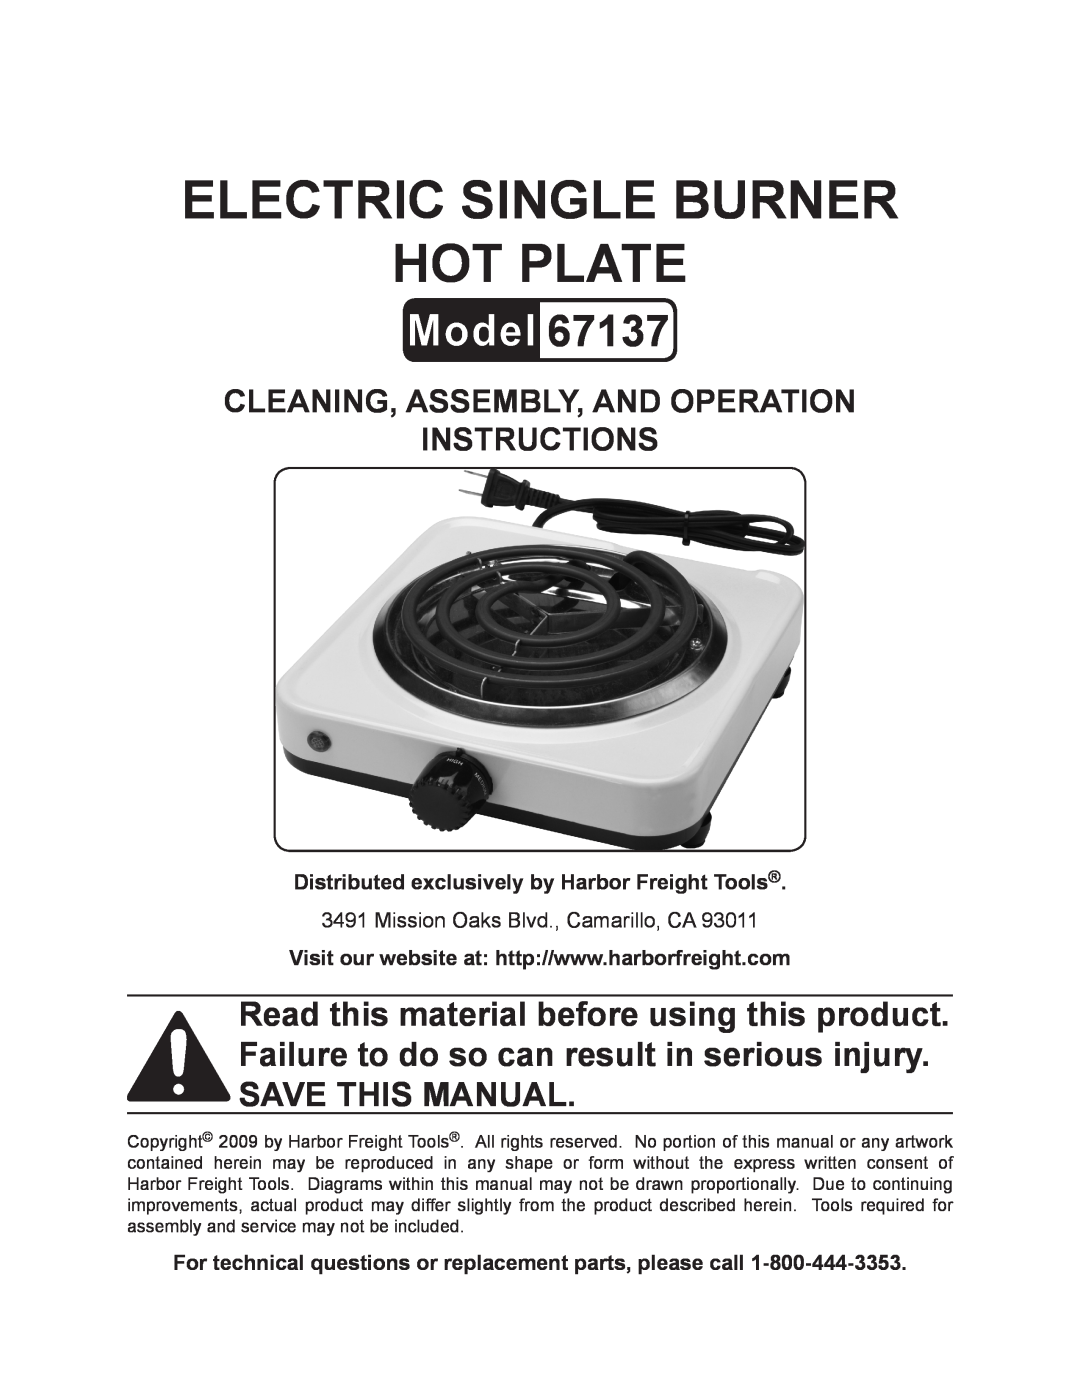 Harbor Freight Tools 67137 manual Electric Single Burner Hot Plate, Cleaning, Assembly, And Operation Instructions 